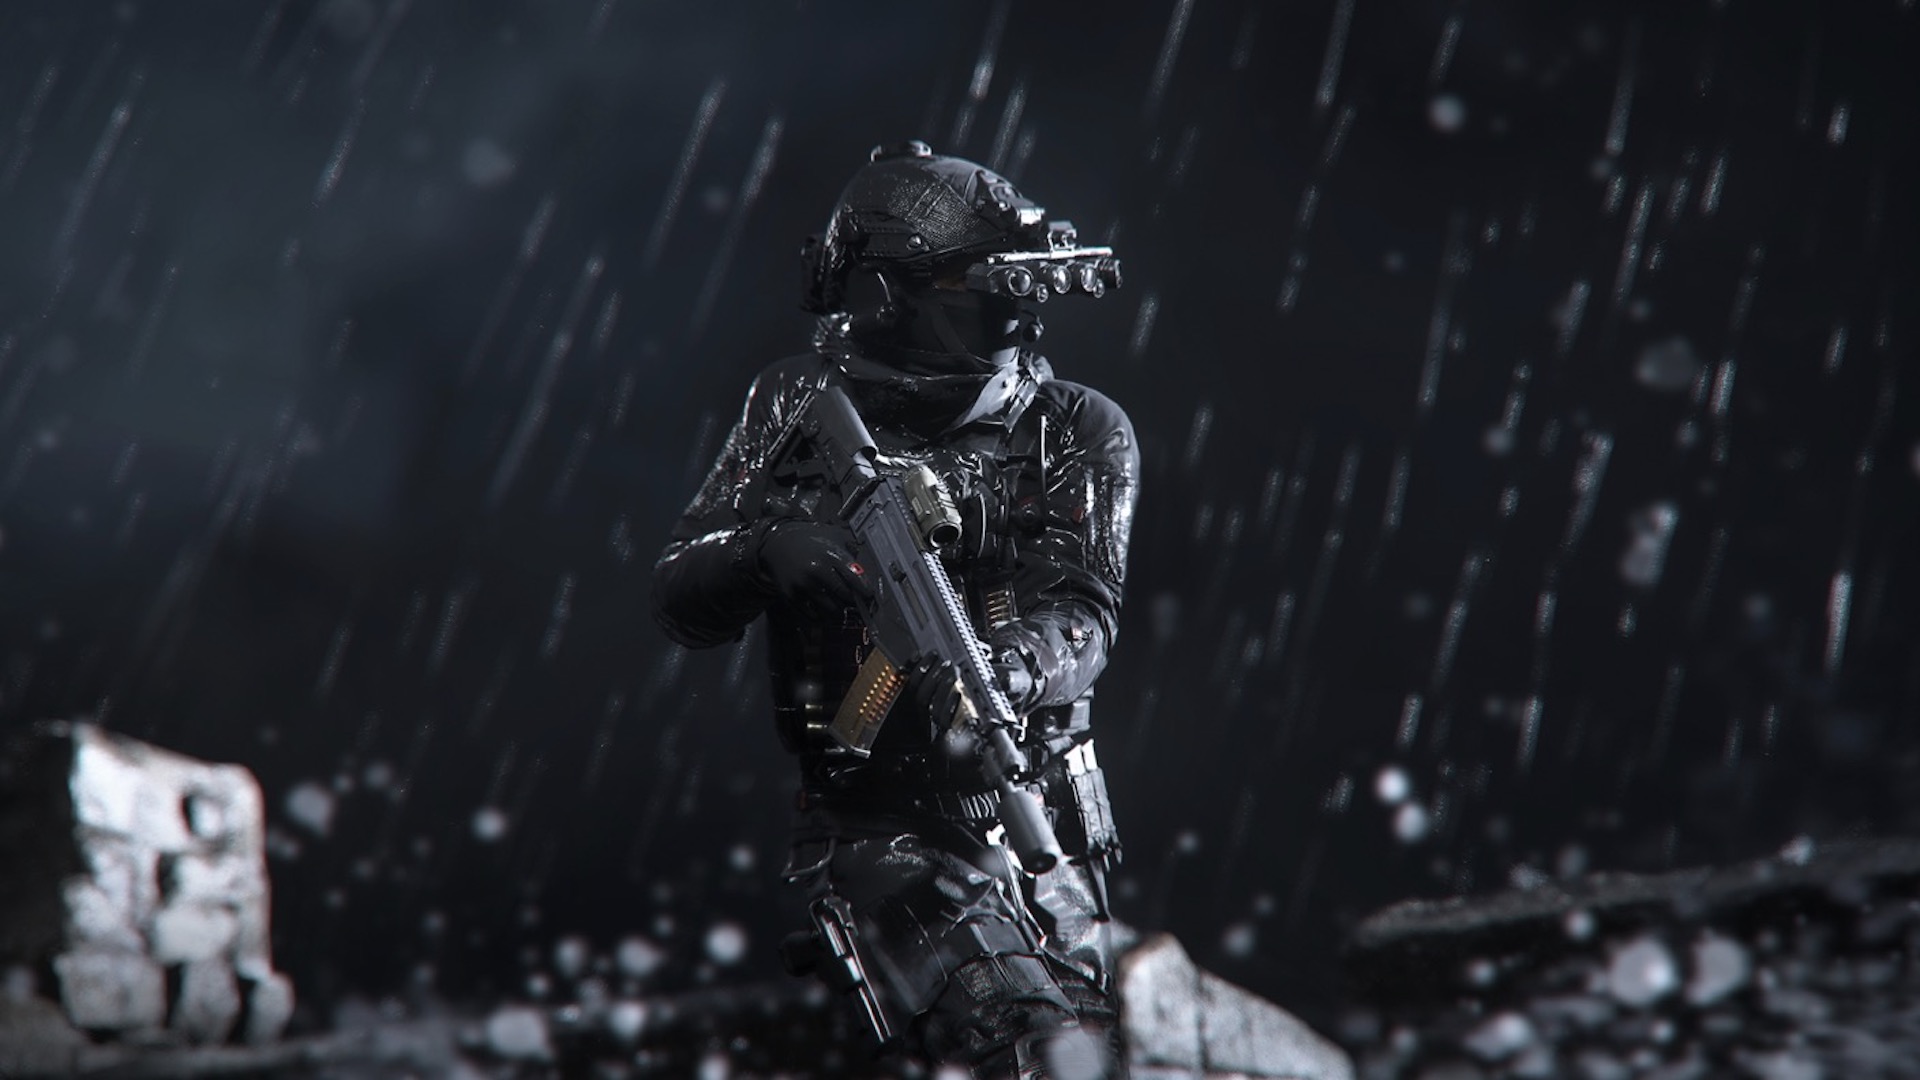 A soldier stands in the pouring rain in Modern Warfare 3's campaign